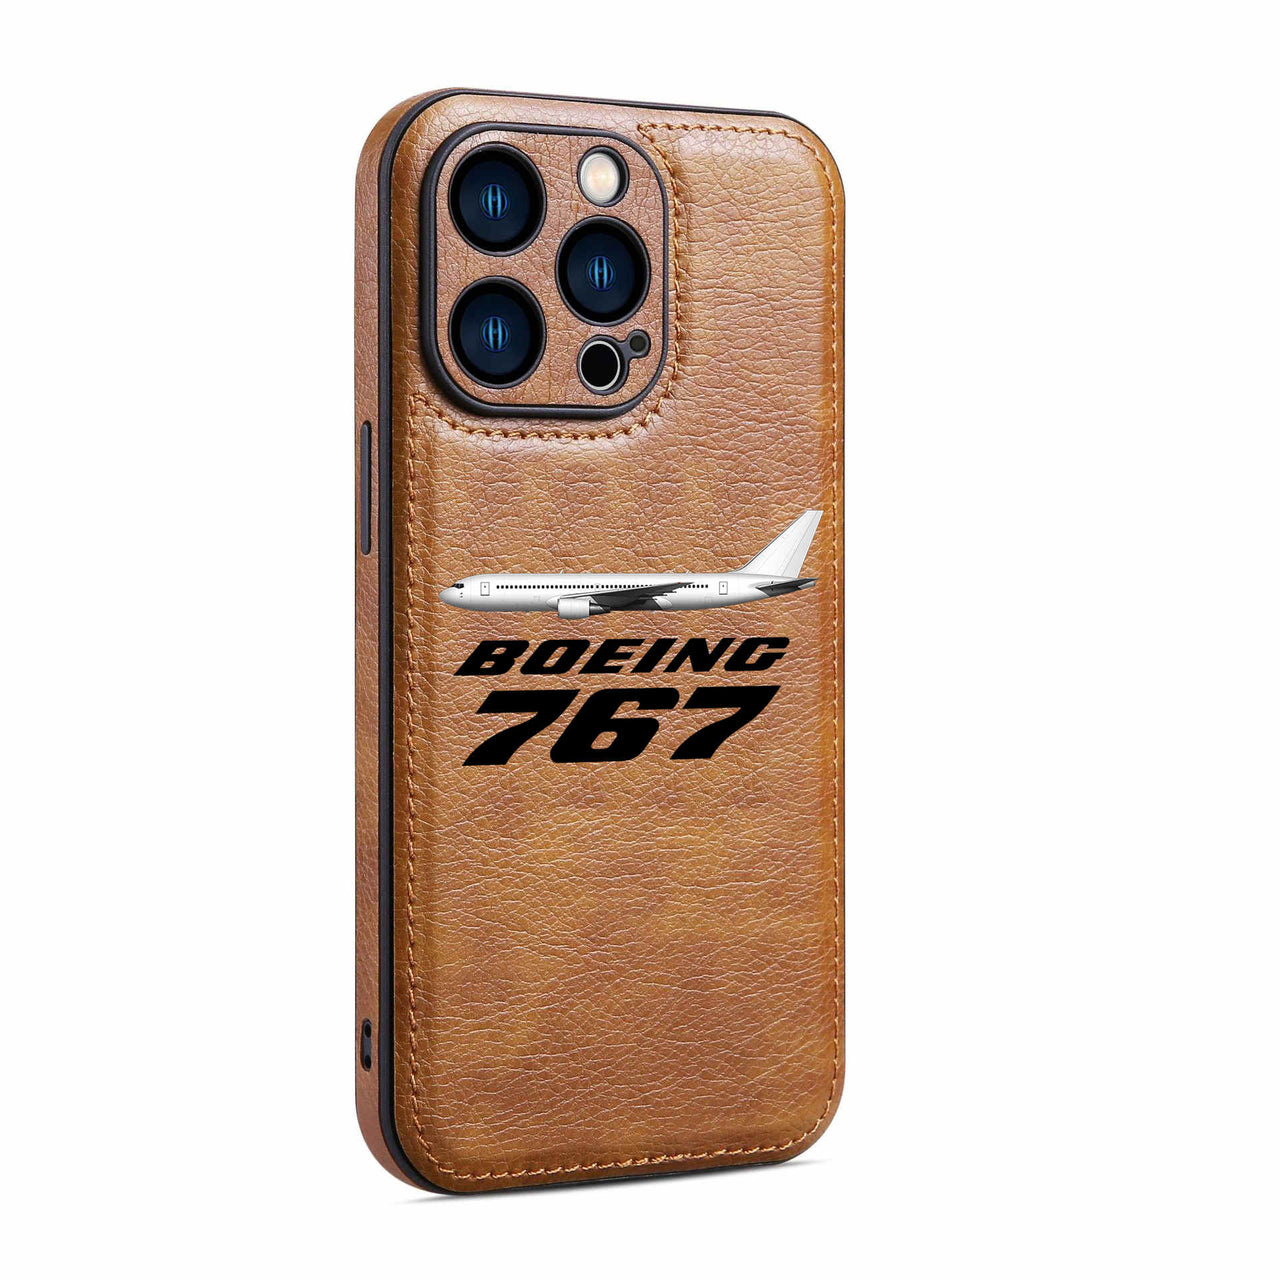 The Boeing 767 Designed Leather iPhone Cases